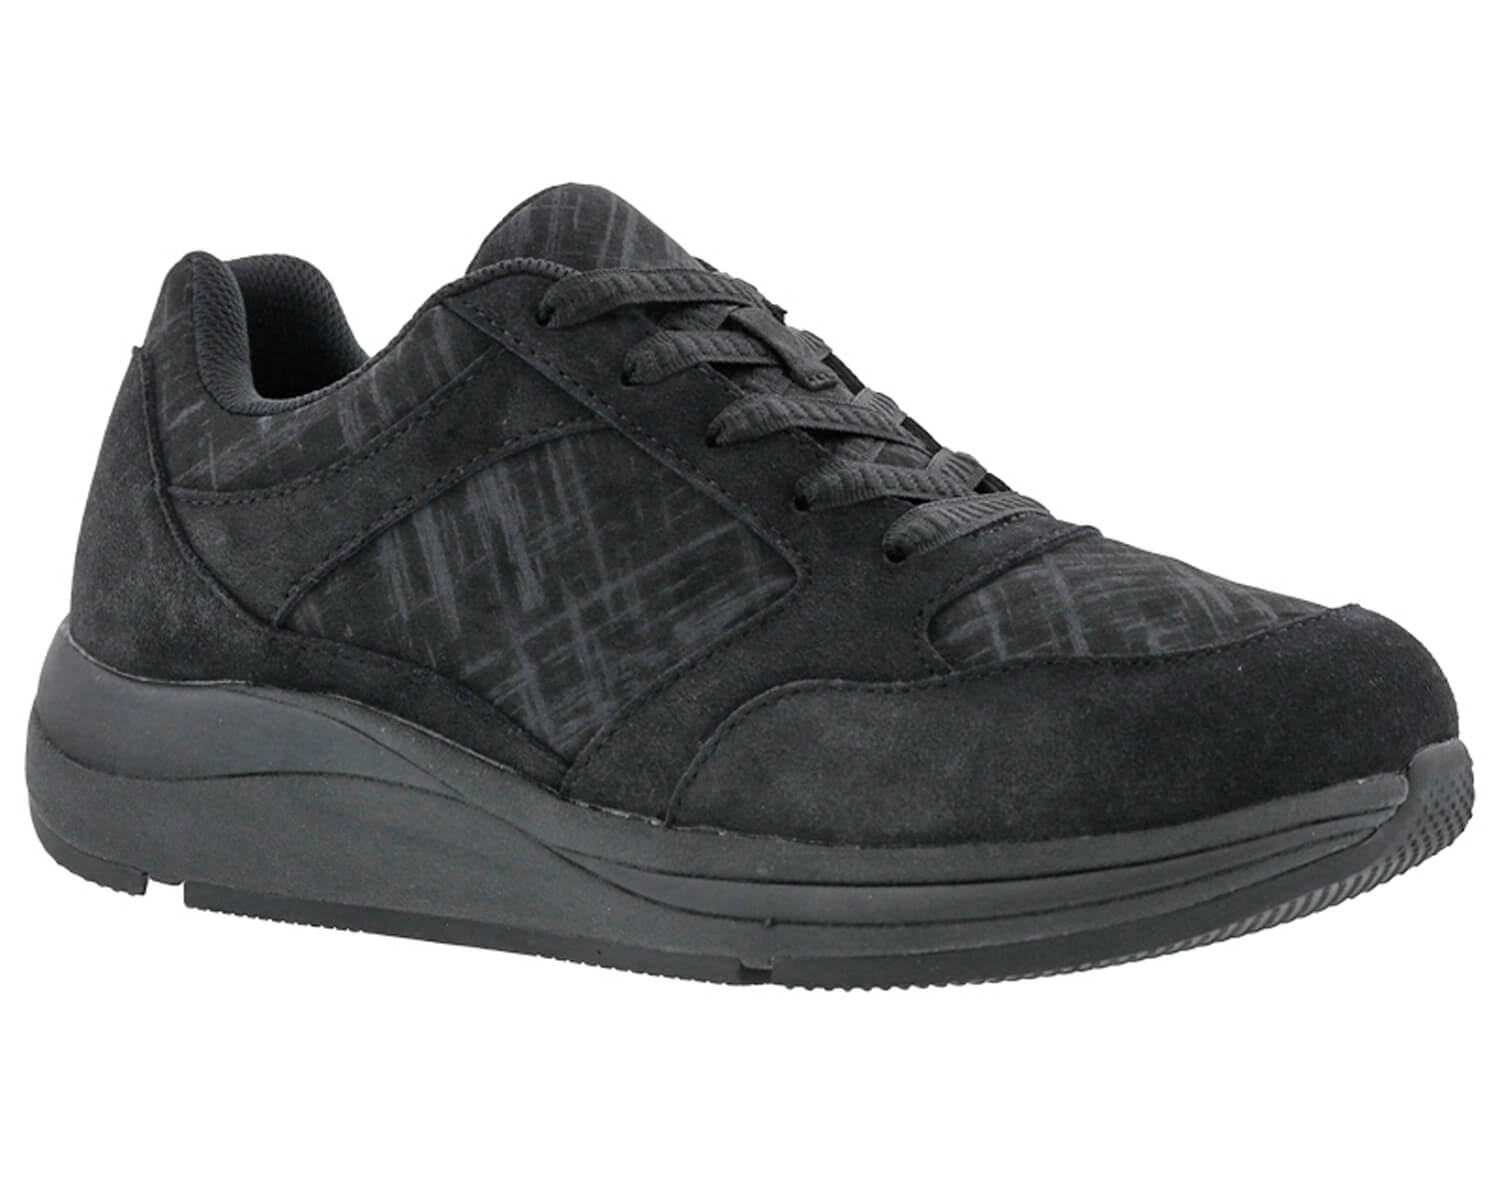 Drew Shoes Chippy 10850 - Women's Athletic Shoe - Comfort Orthopedic Diabetic Shoe - Extra Depth - Extra Wide